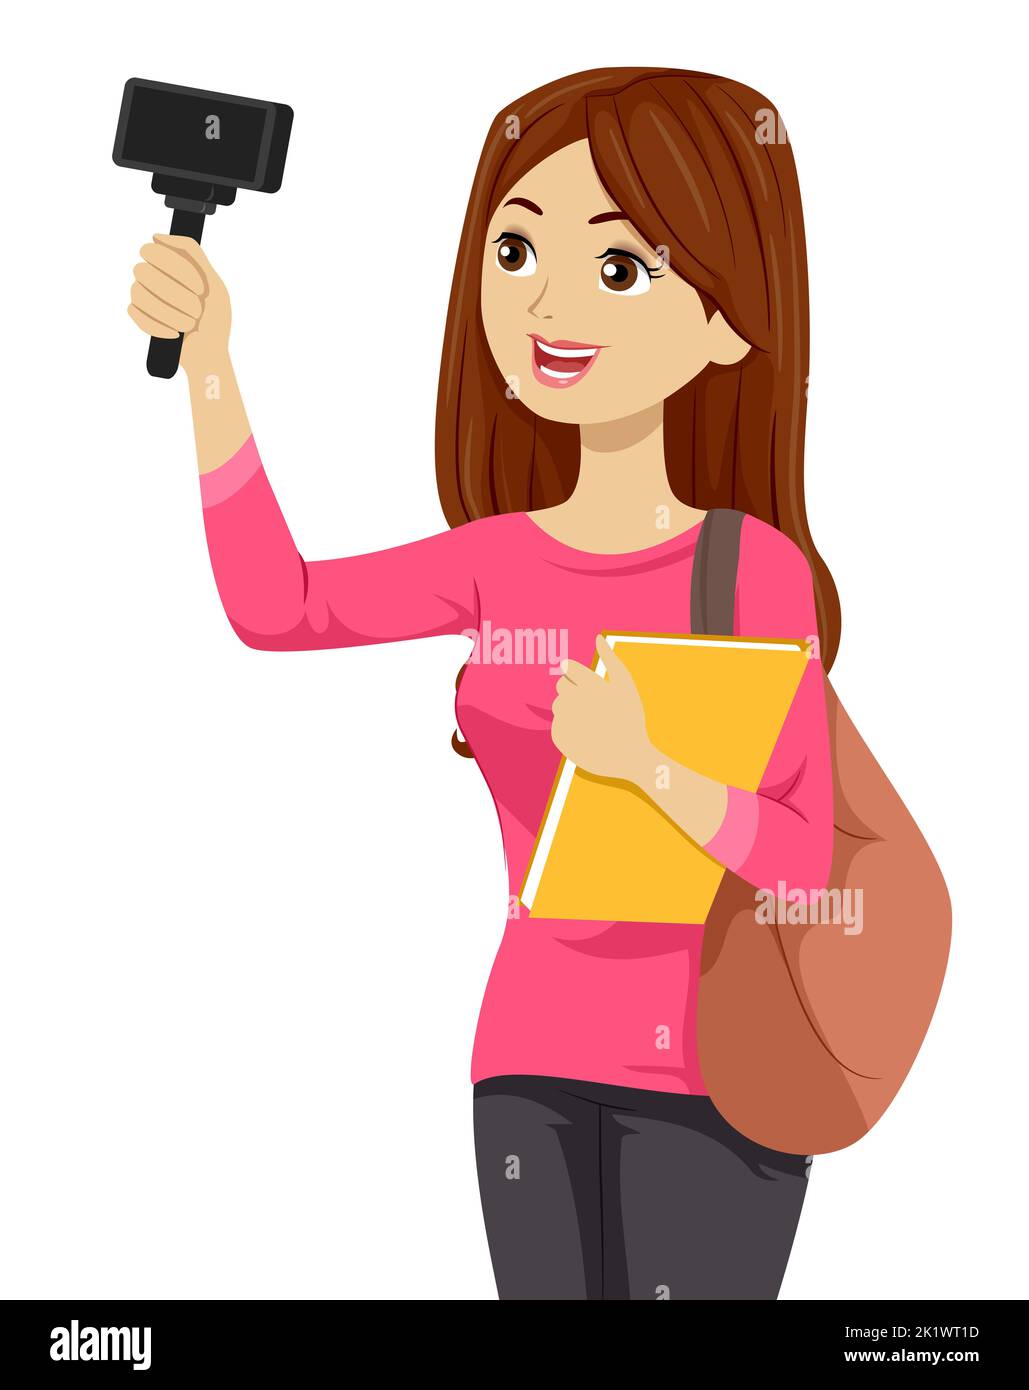 Illustration of Teen Girl Student with Bag and Book, Holding Monopod and Using Mobile Phone Camera for Vlog Stock Photo